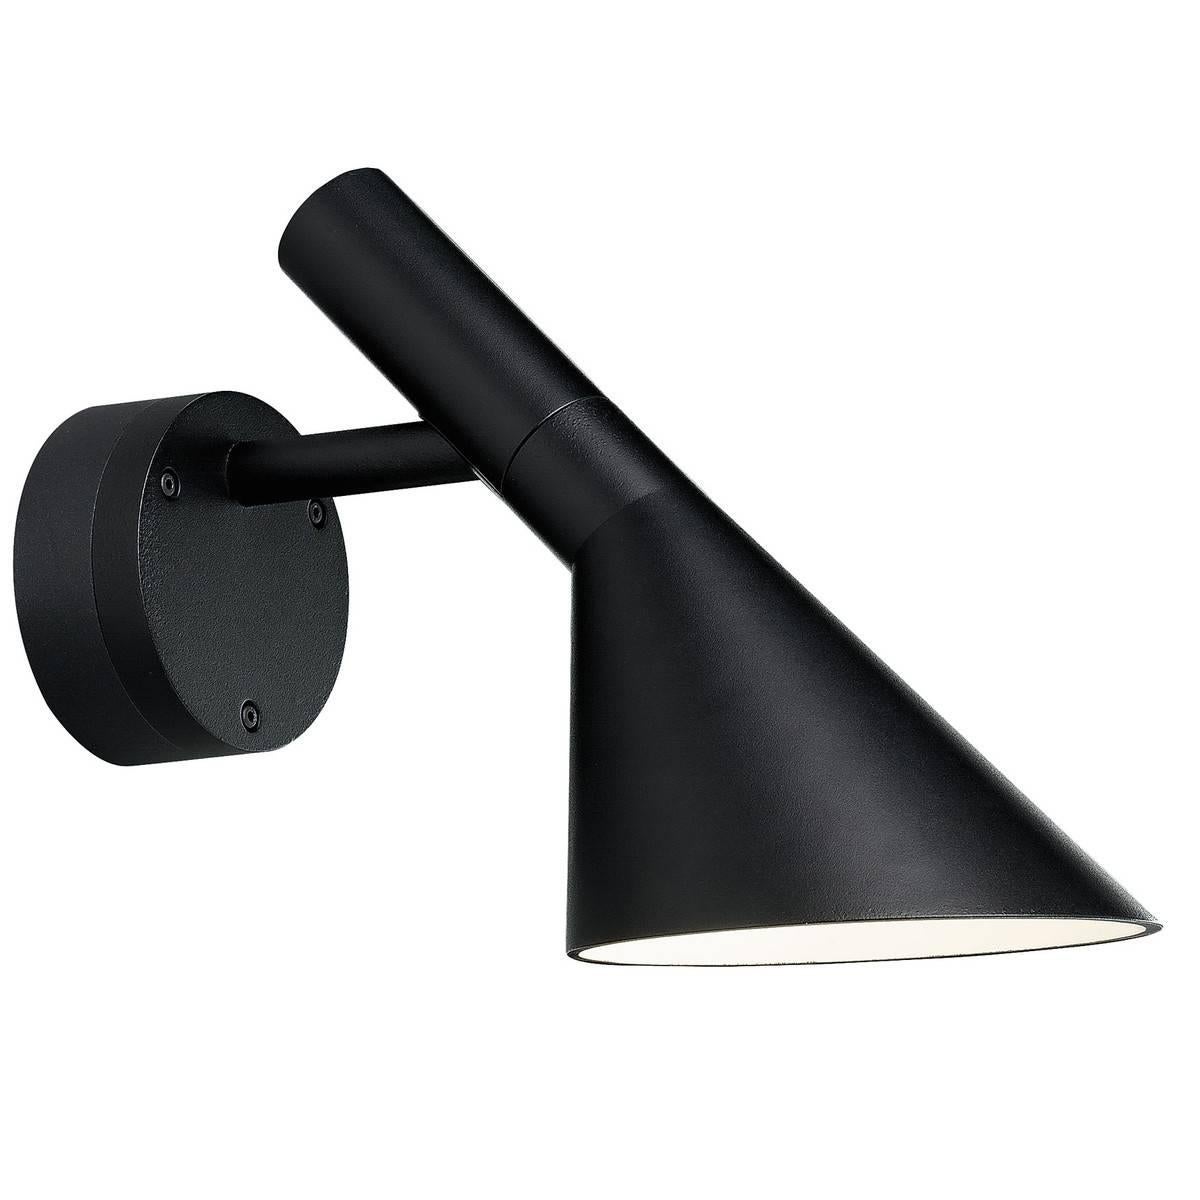 Arne Jacobsen AJ 50 outdoor wall light for Louis Poulsen. Based on his iconic 1960 Danish Modern design. The fixture emits downward directed light. The shade is painted white on the inside to ensure a soft comfortable light distribution with a